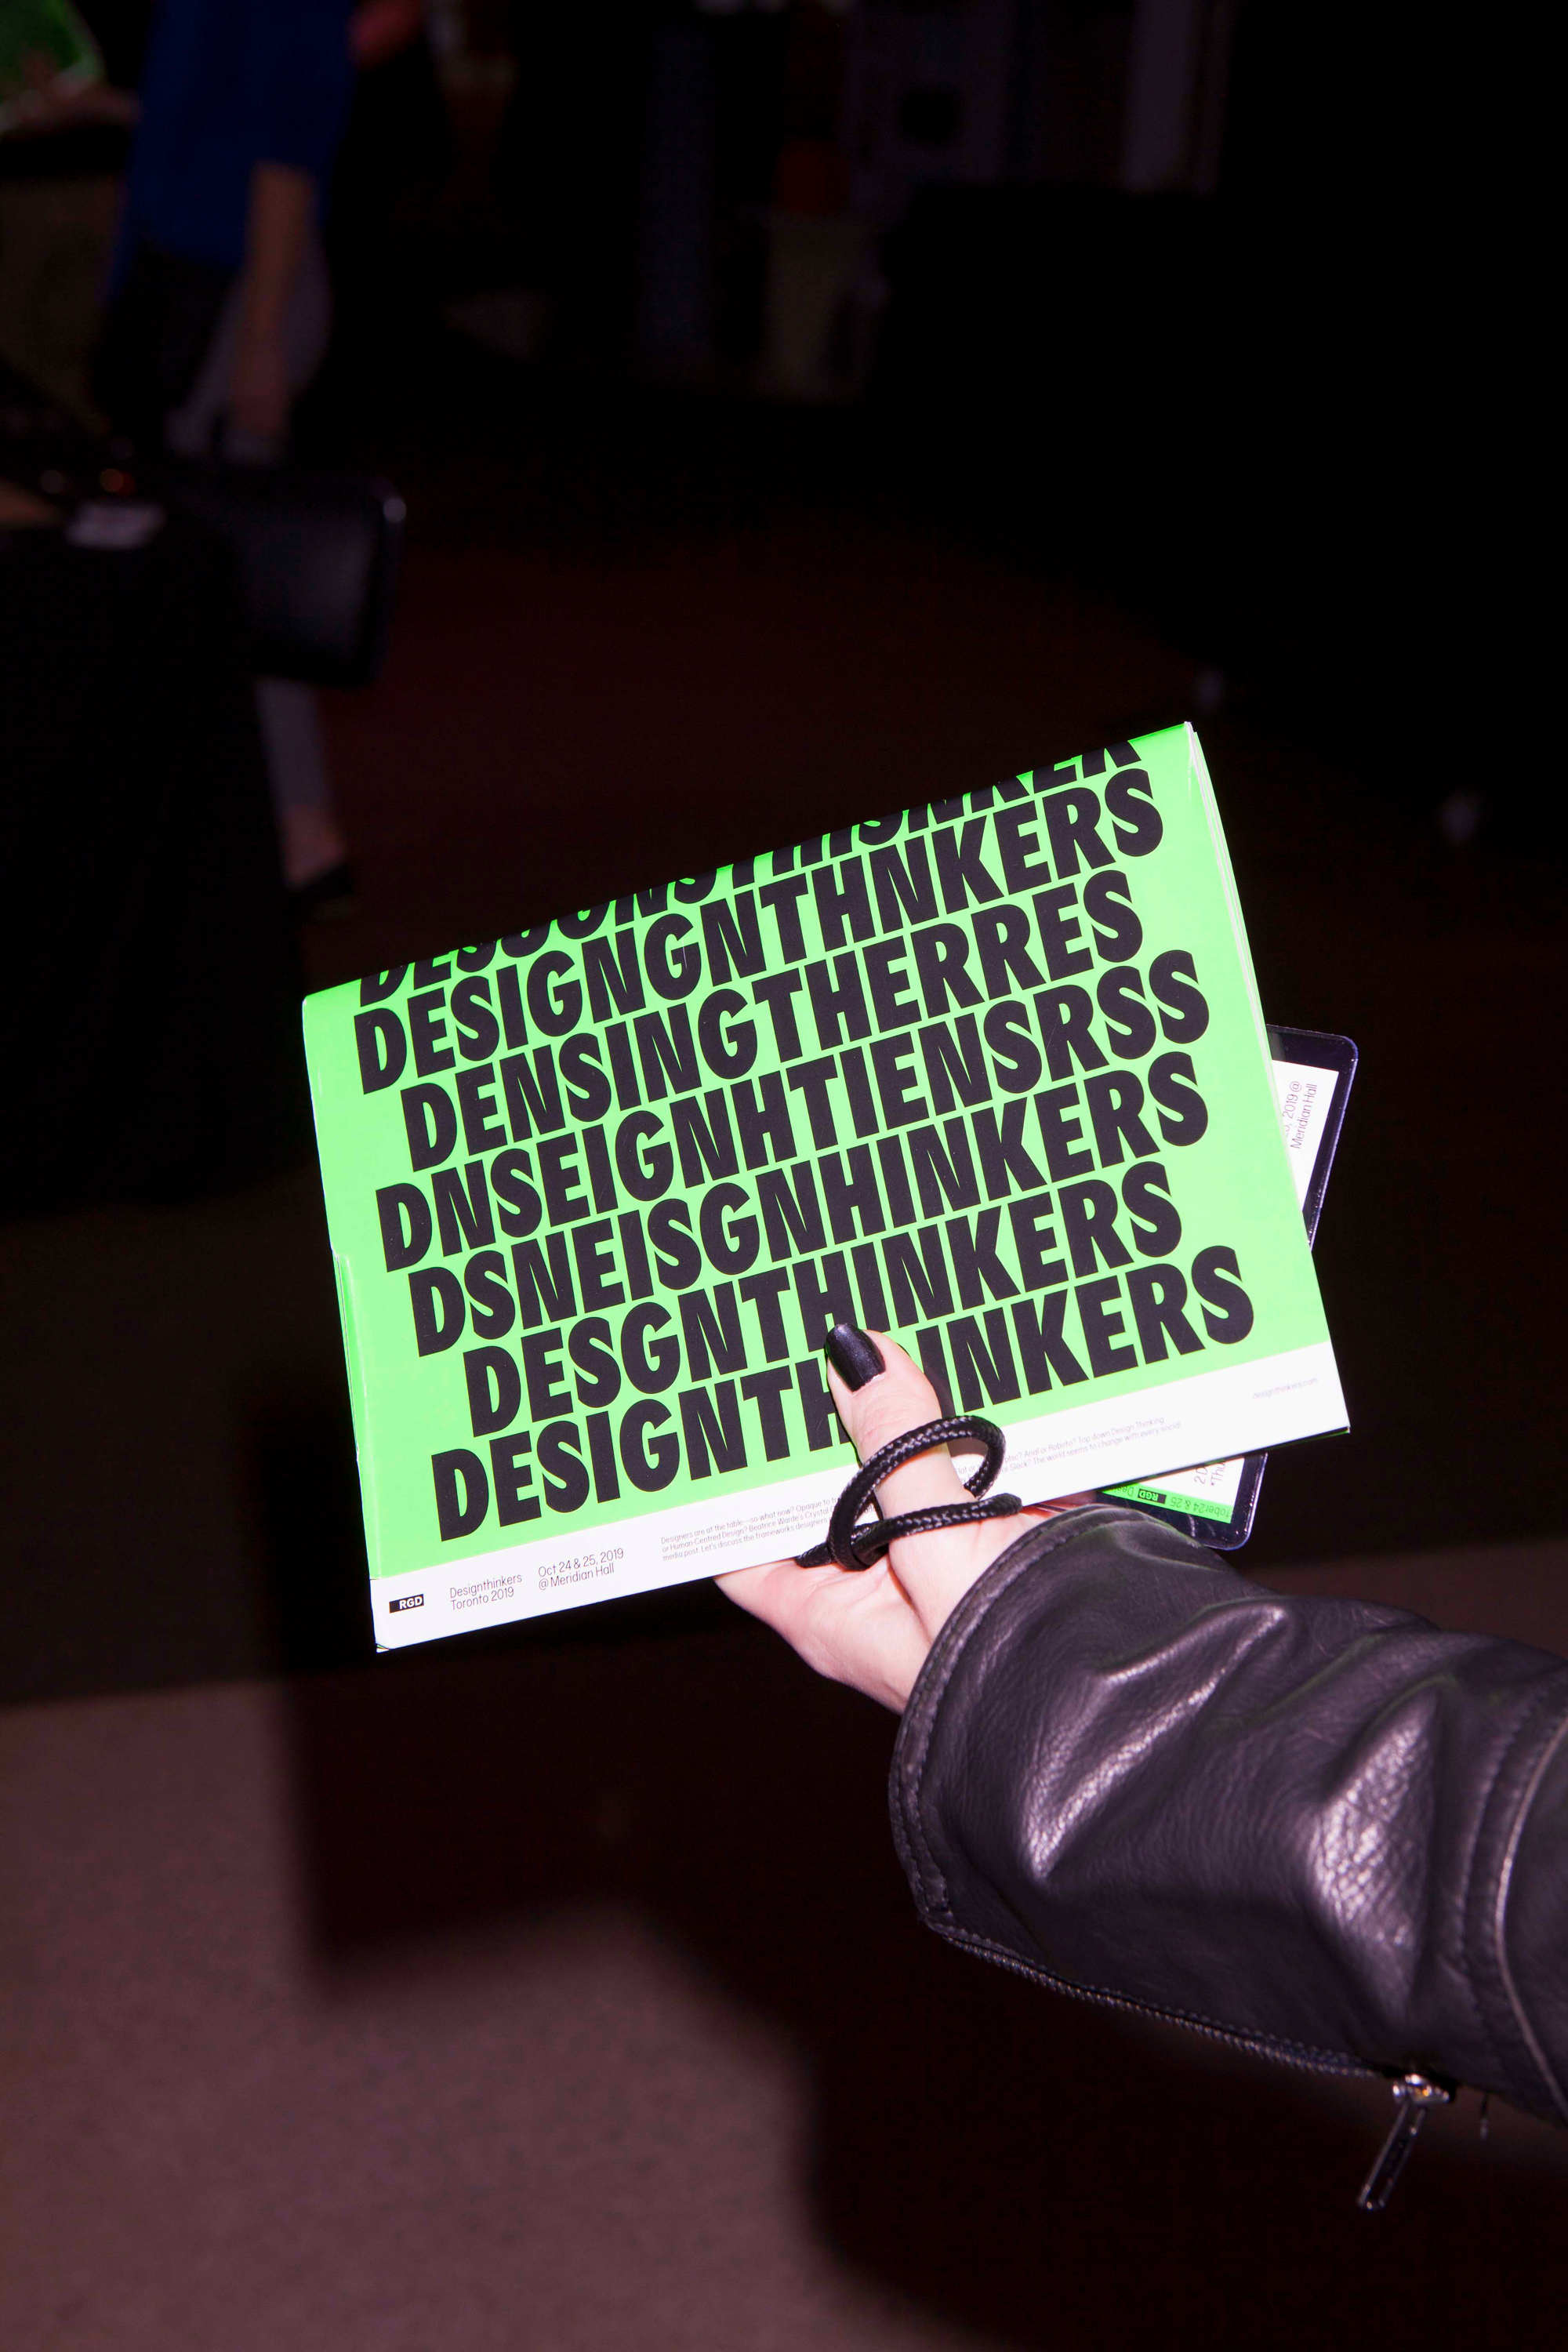 Hand holding a Design Thinkers booklet.